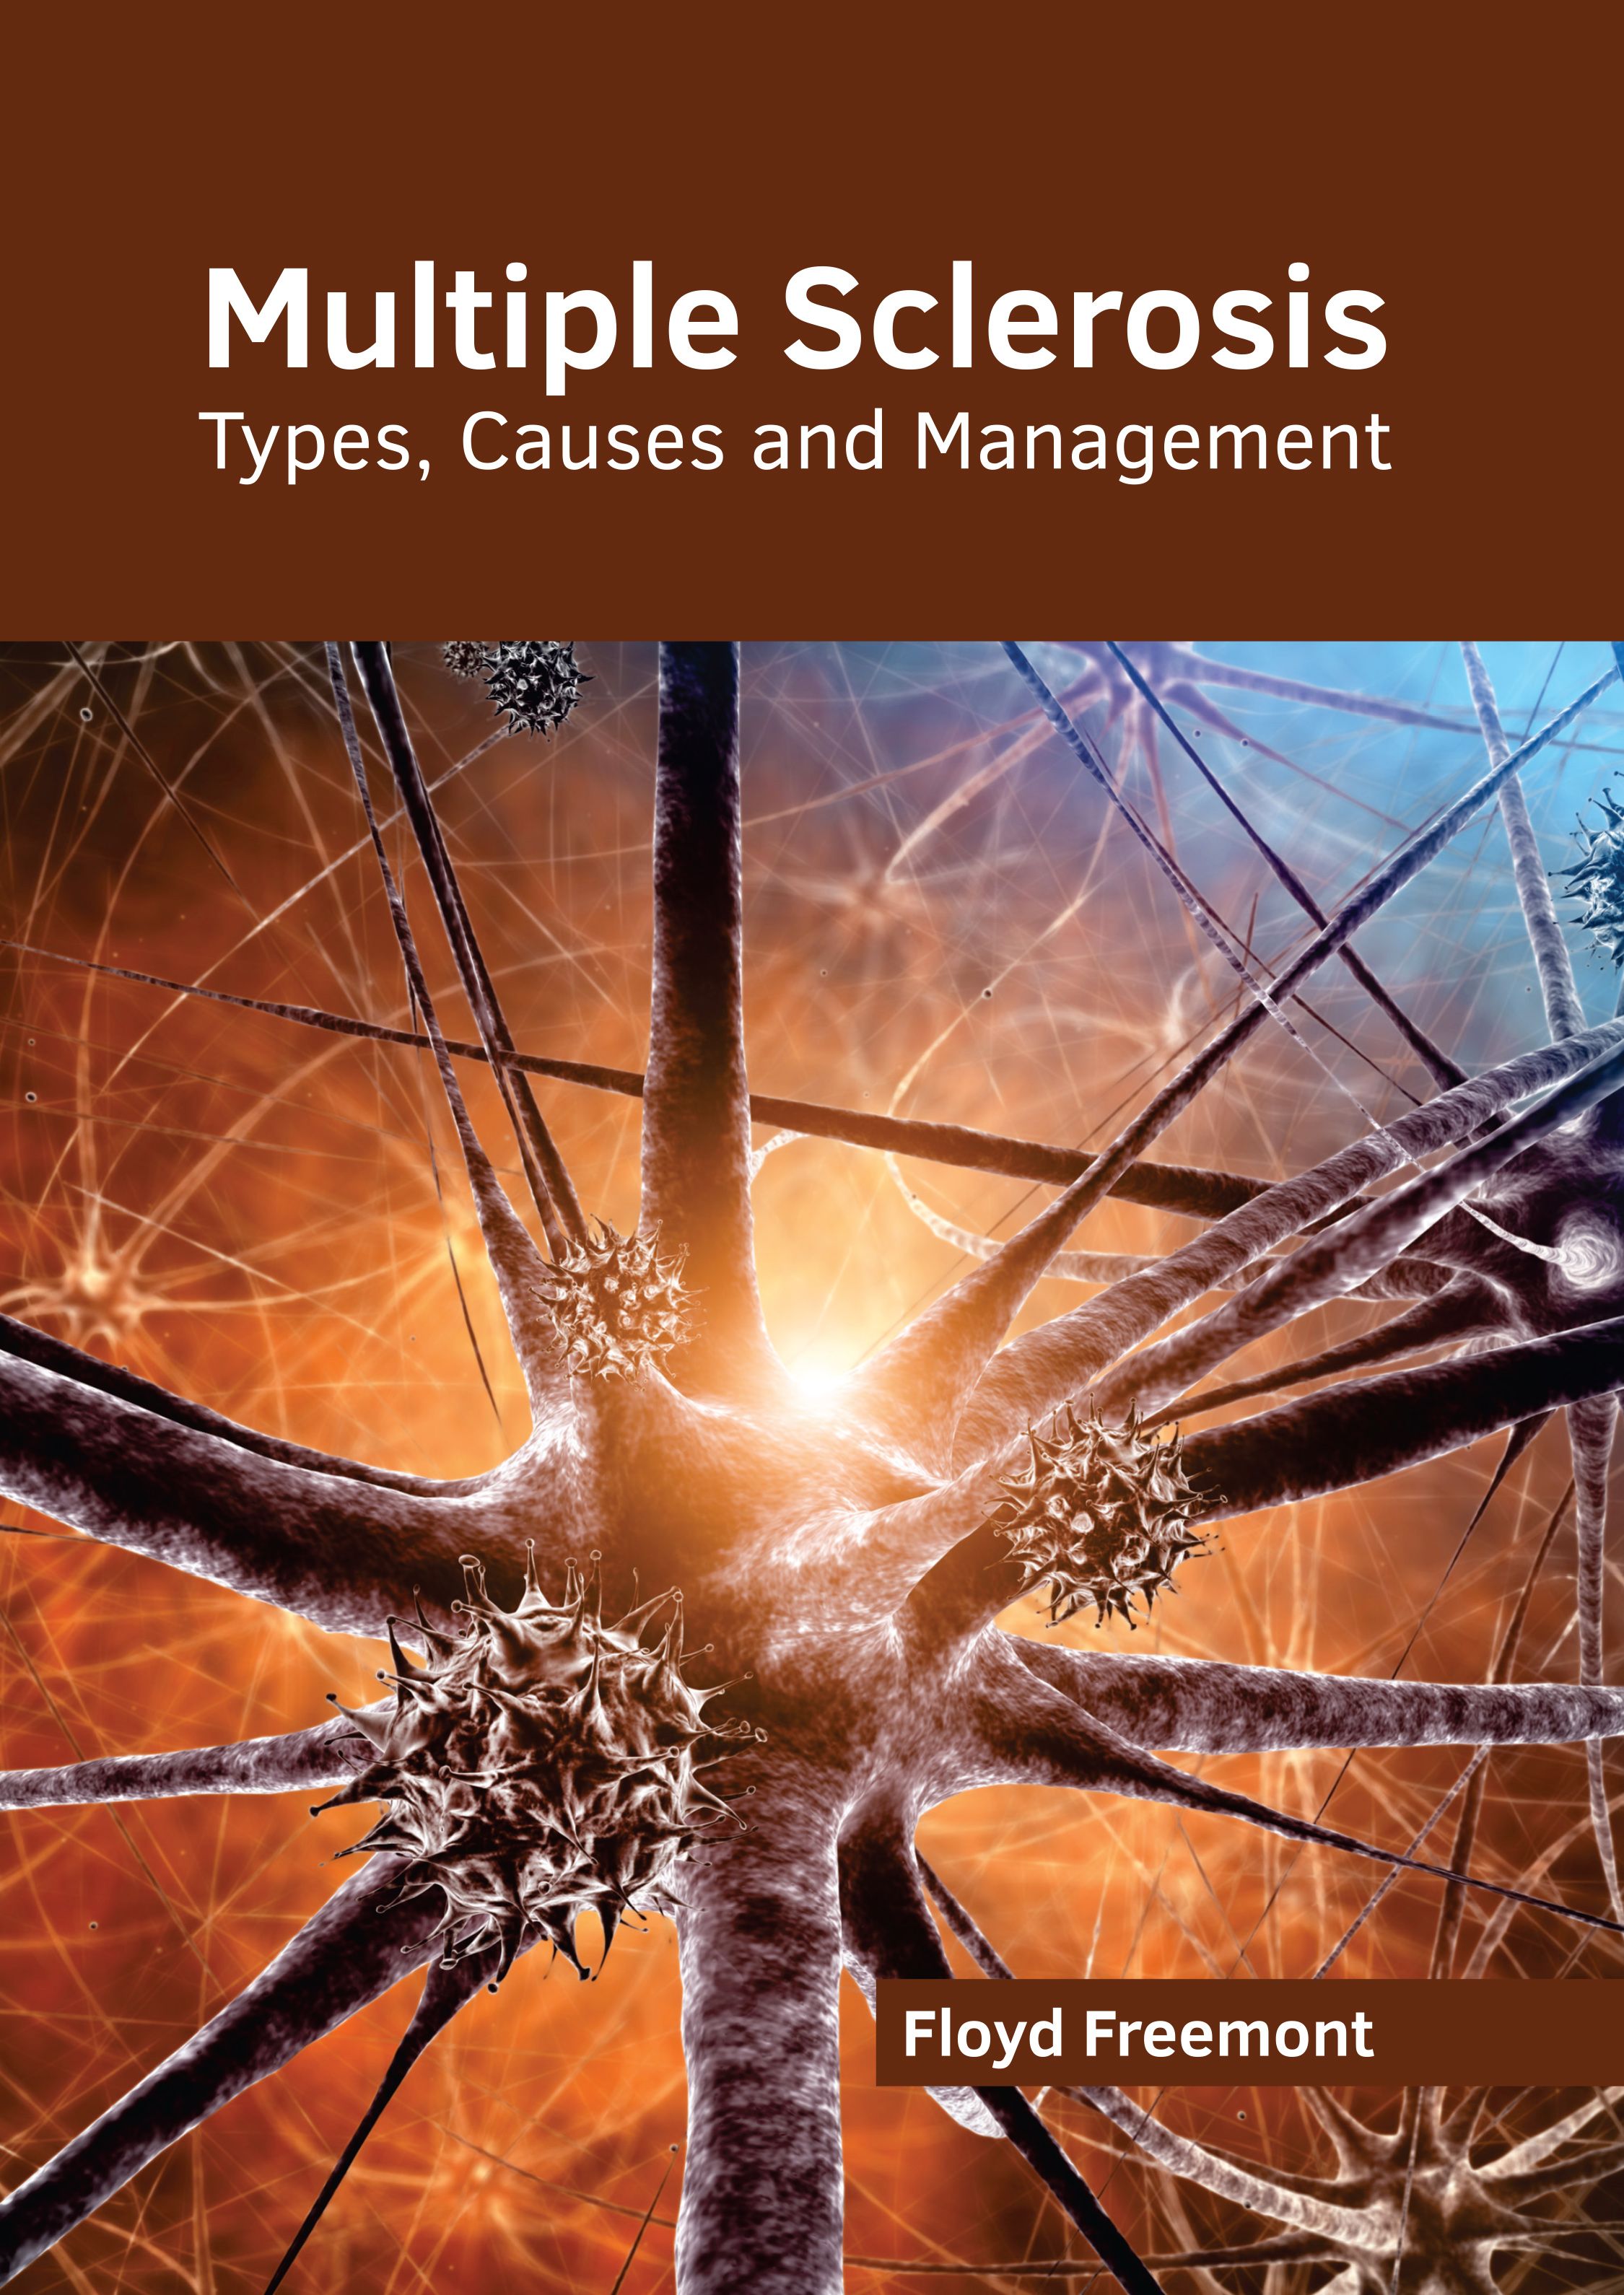 MULTIPLE SCLEROSIS: TYPES, CAUSES AND MANAGEMENT